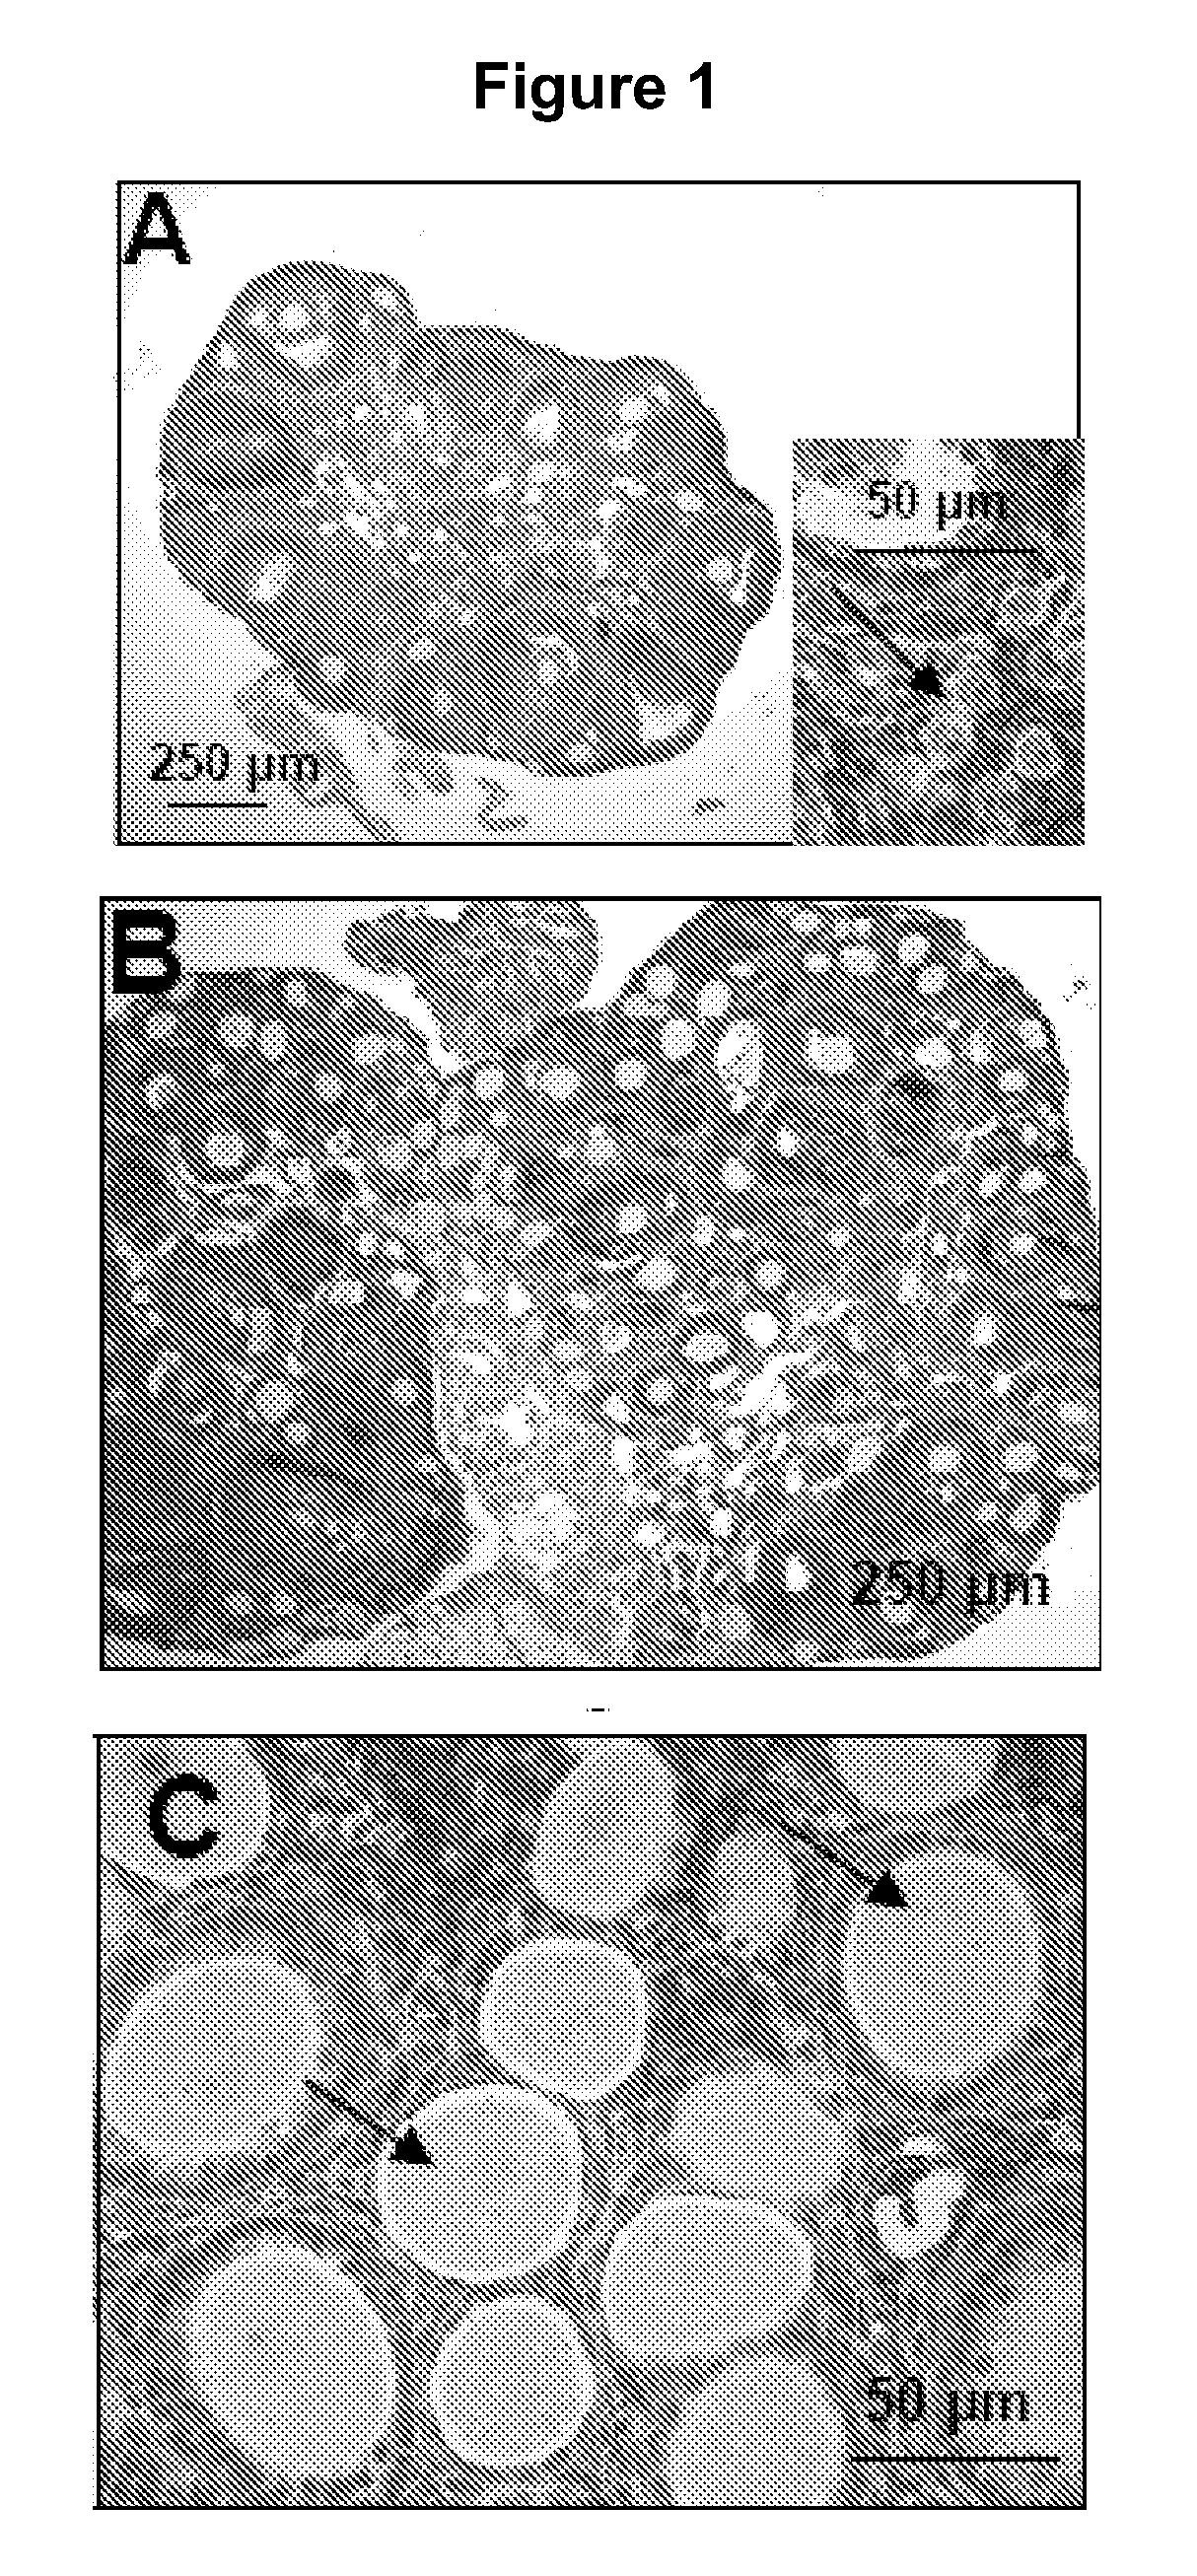 Methods for in vitro maturation of ovarian follicles